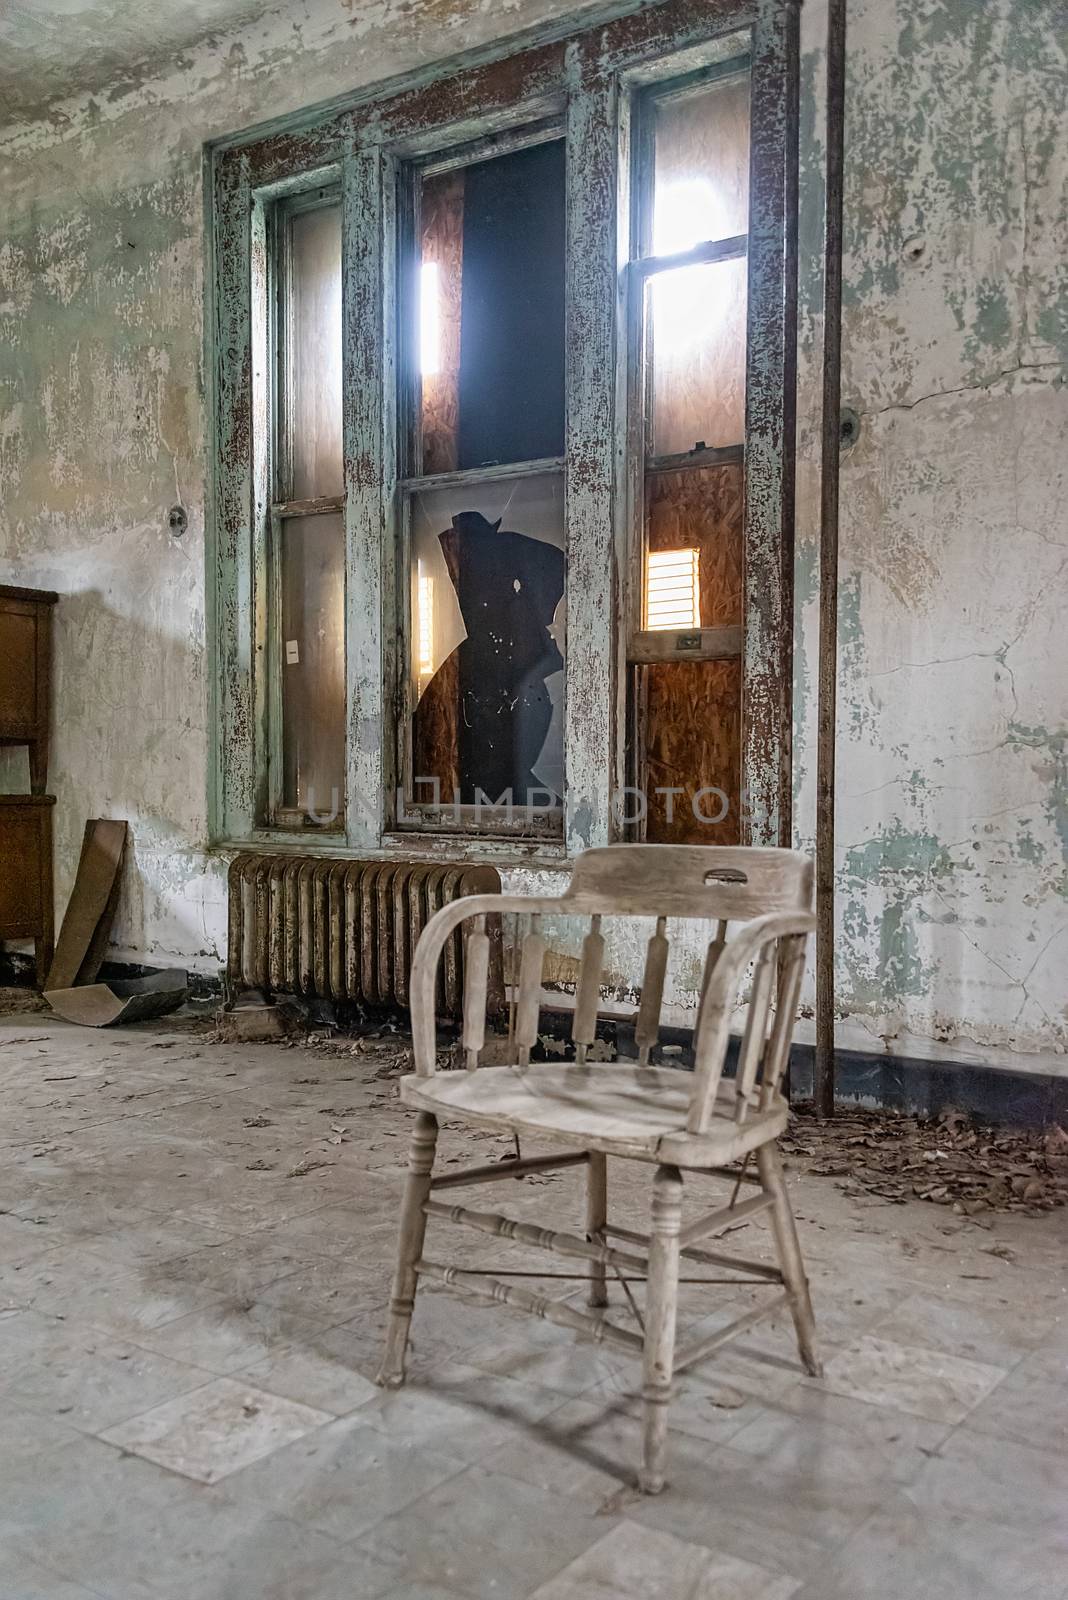 USA, New York, Ellis Island - May 2019: Old furniture abandoned in a derelict building